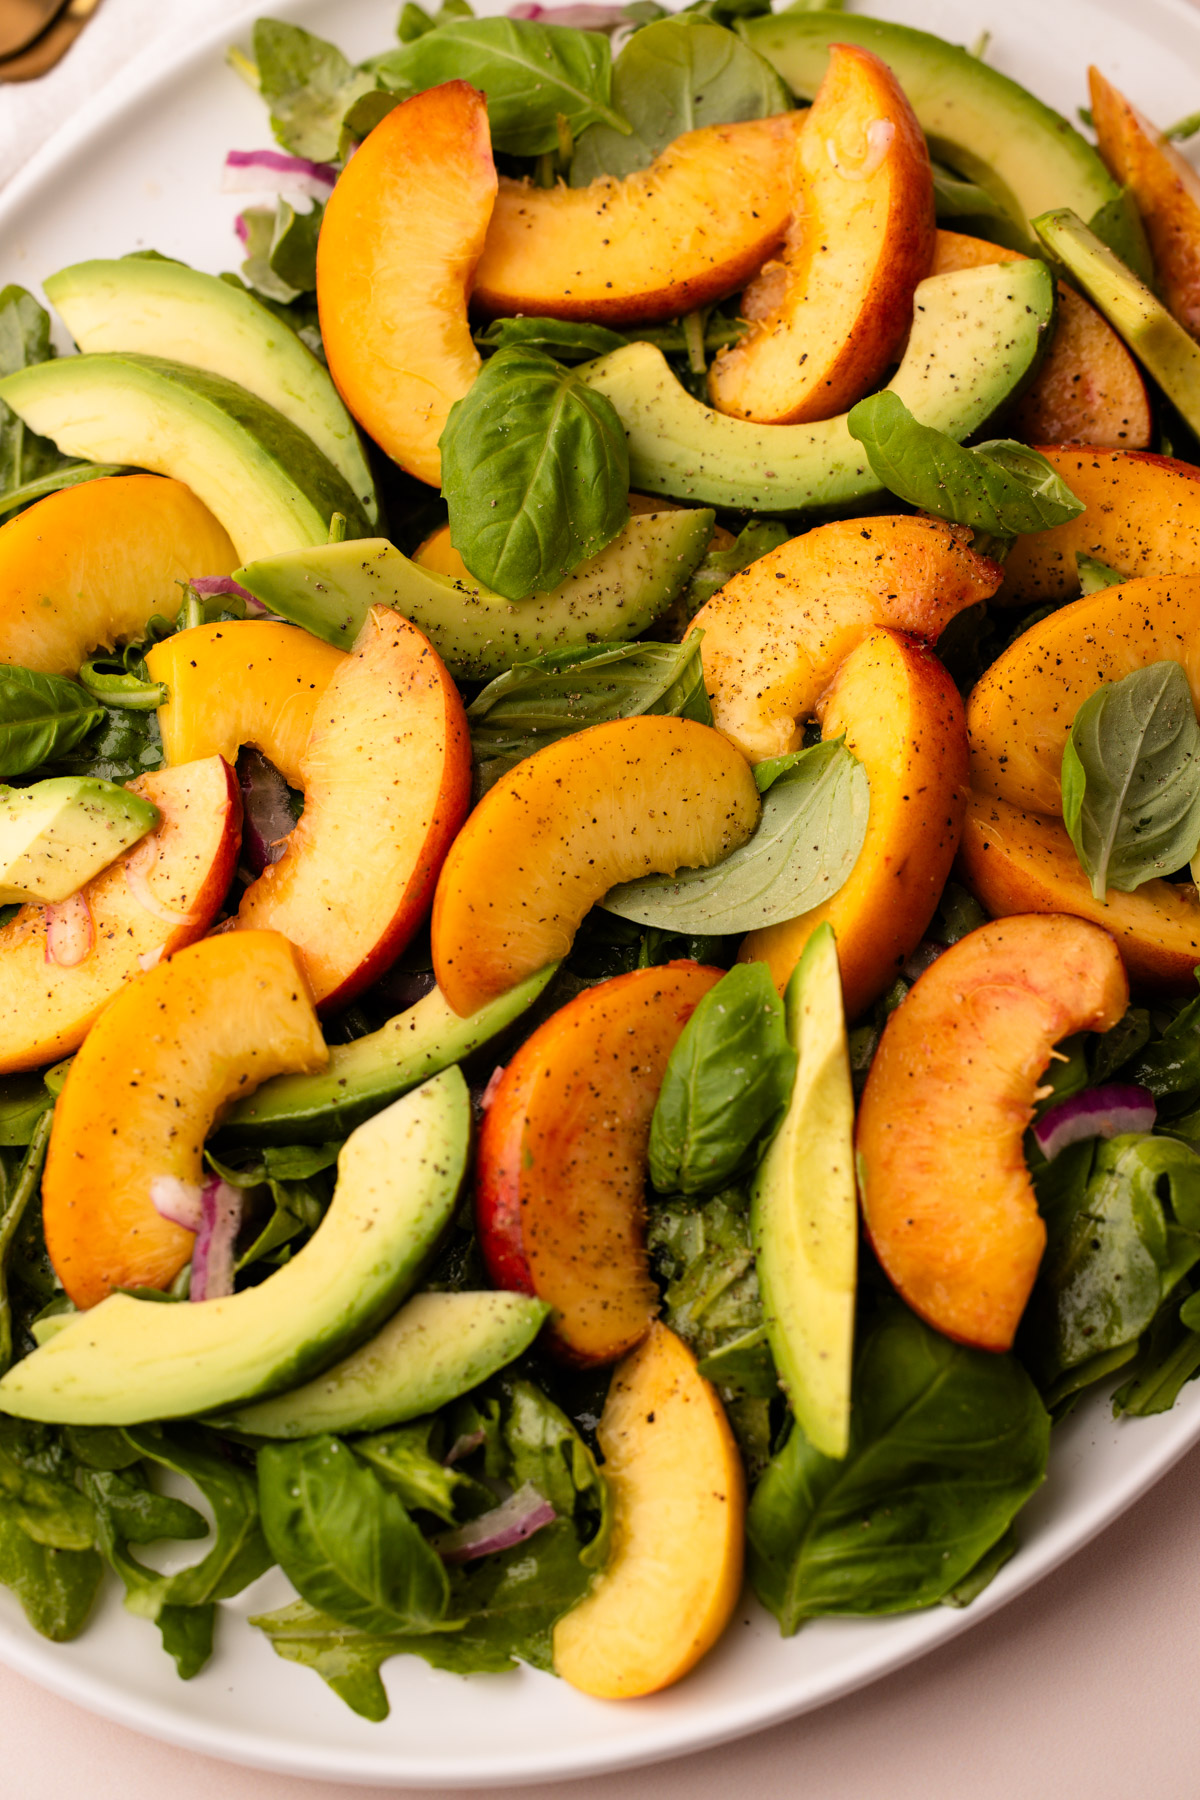 A platter with peaches, avocados, arugula scattered to make a salad.